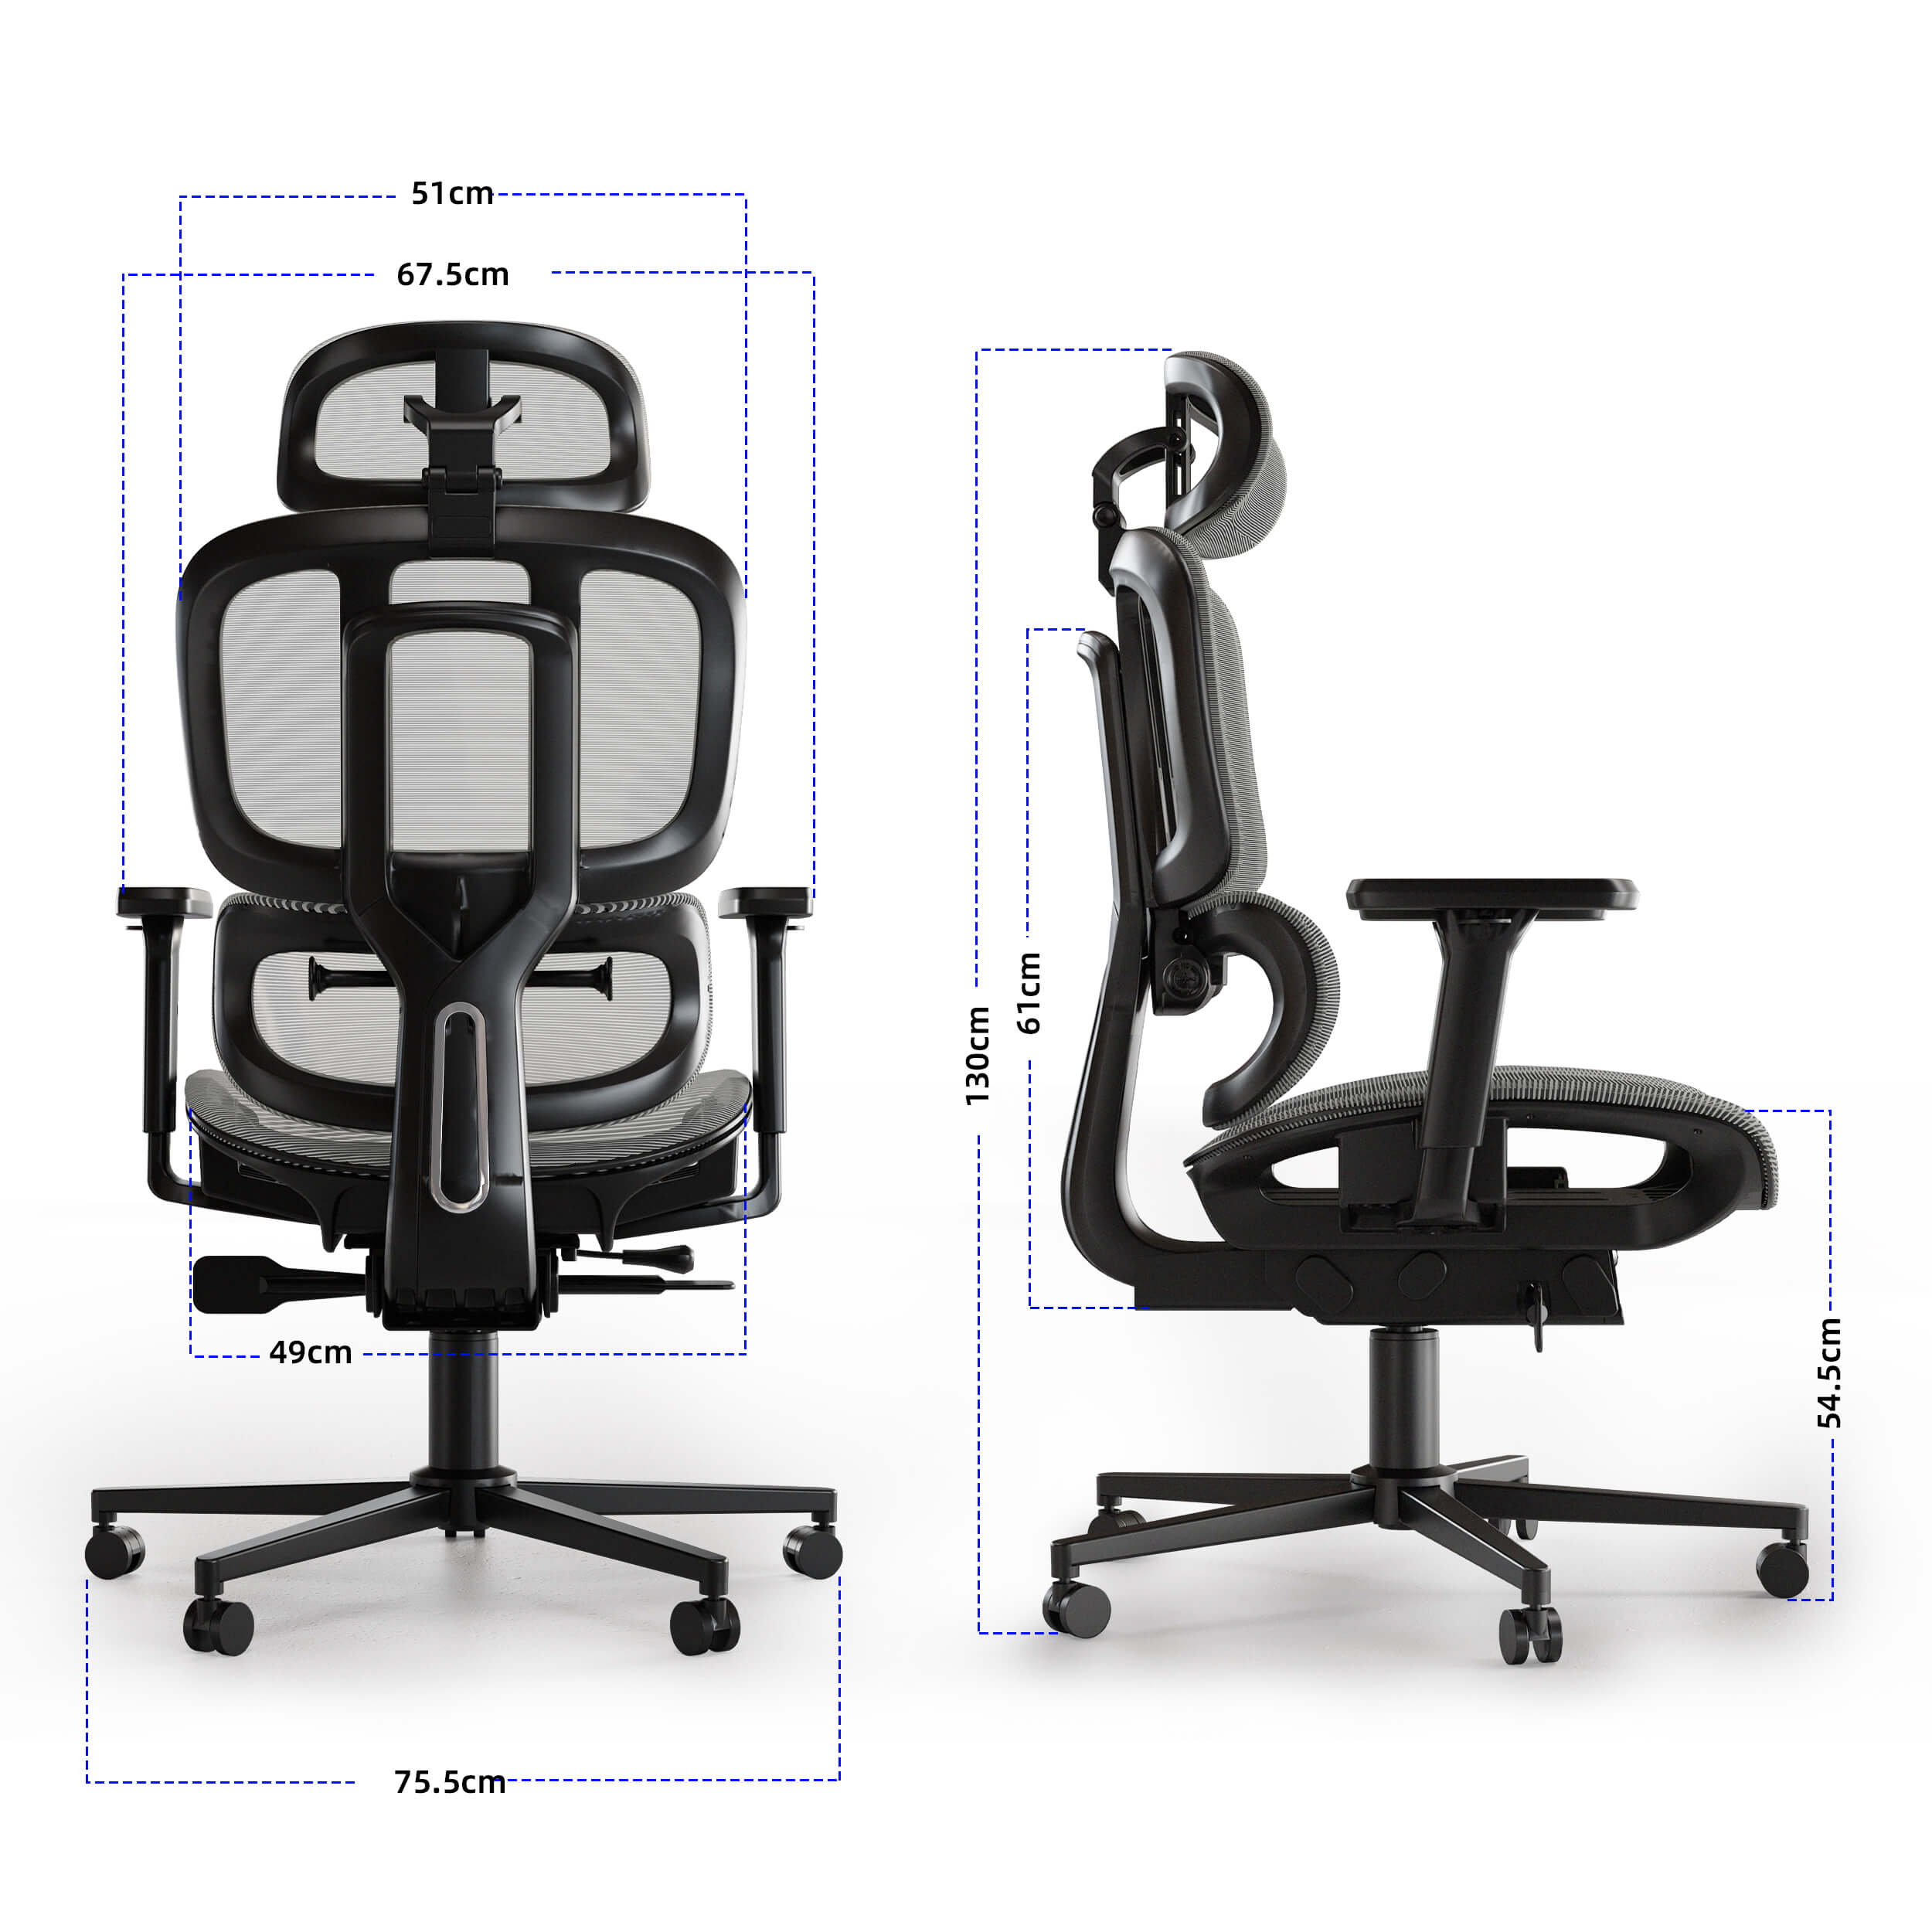 Maidesite best office chair for back pain with adjustable back support